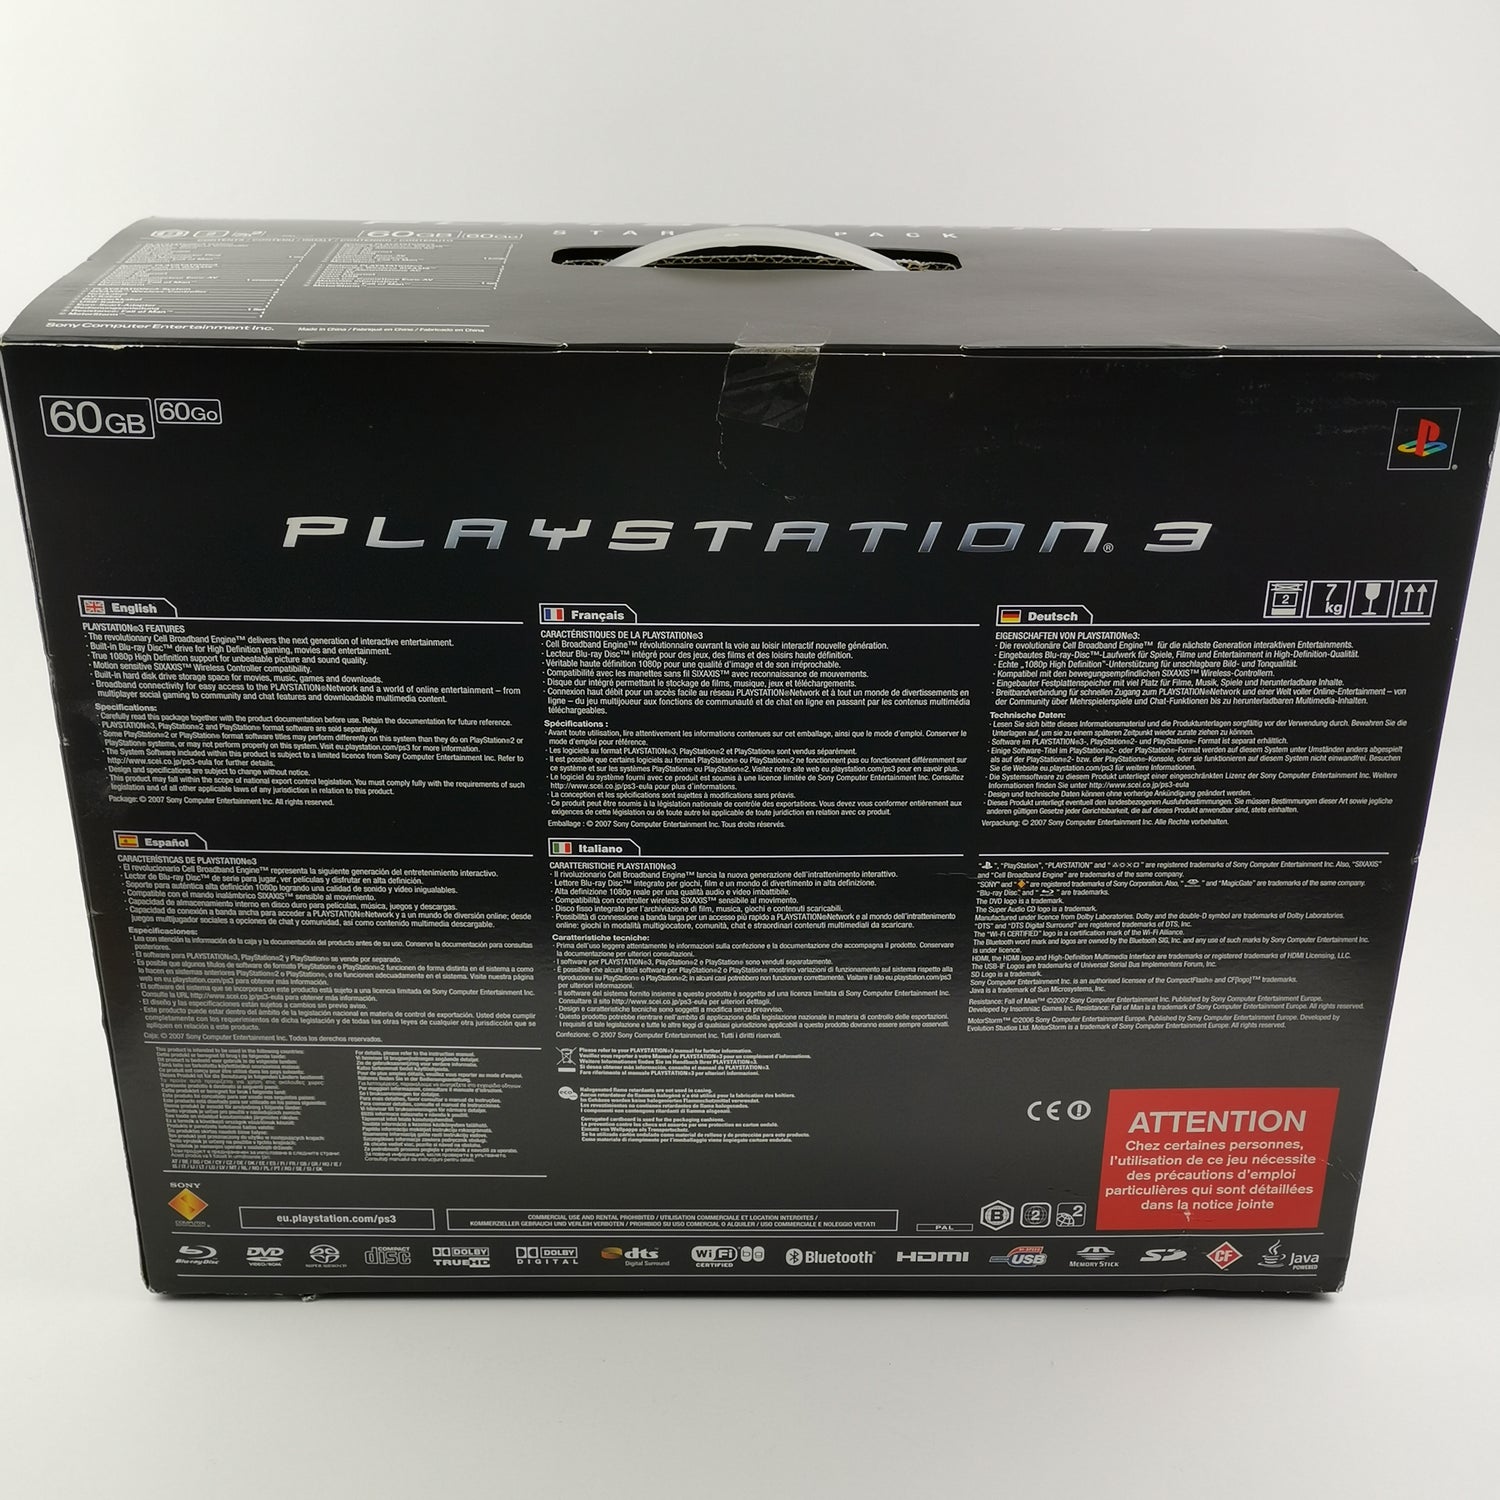 Sony Playstation 3 Konsole : Starter Pack unvollständig - PS3 Console in OVP PAL